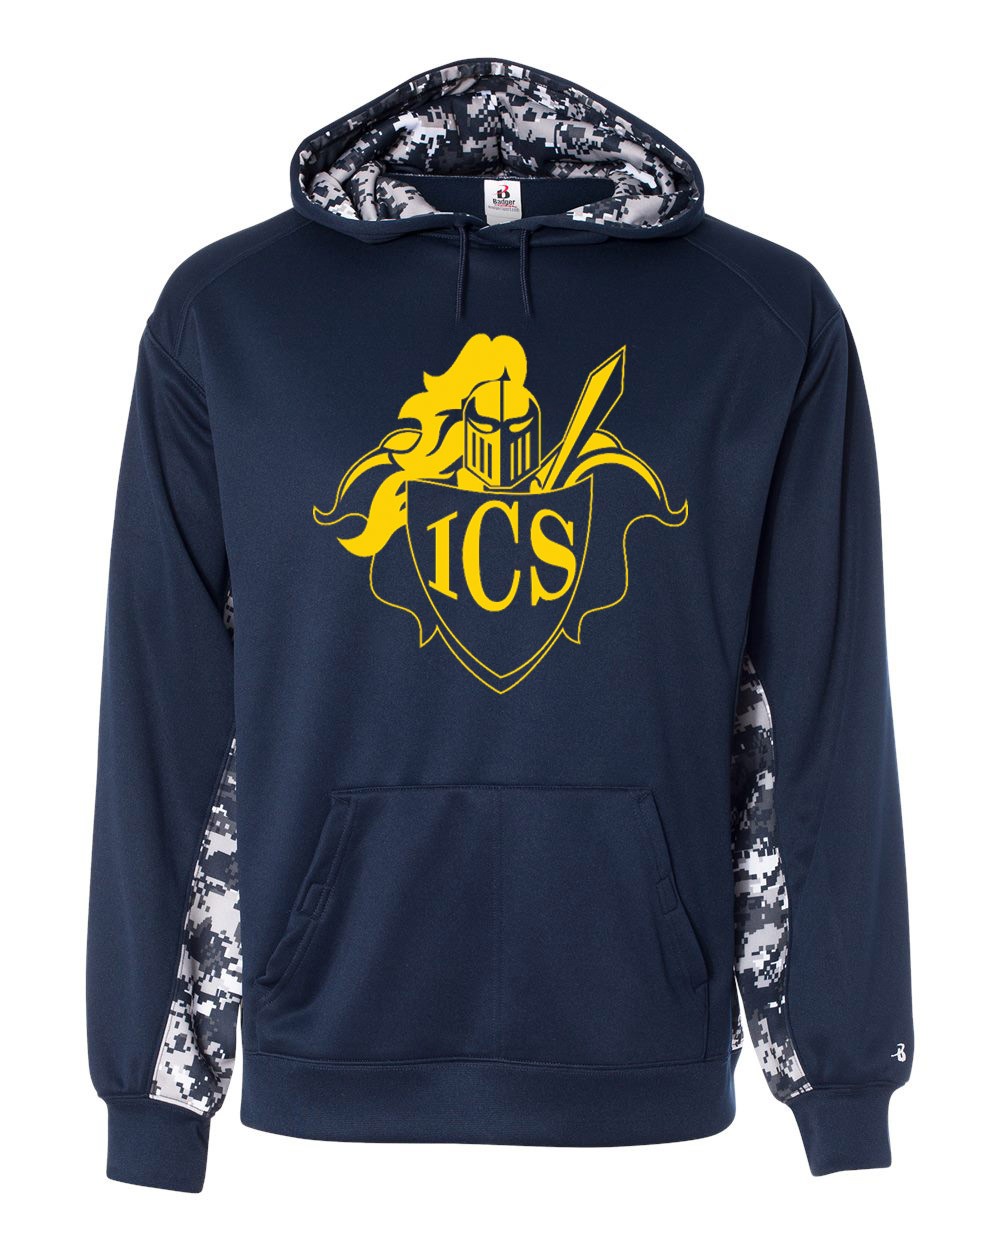 ICS Spirit Digital Color Block Hoodie w/ Gold Logo - Please Allow 2-3 Weeks for Delivery